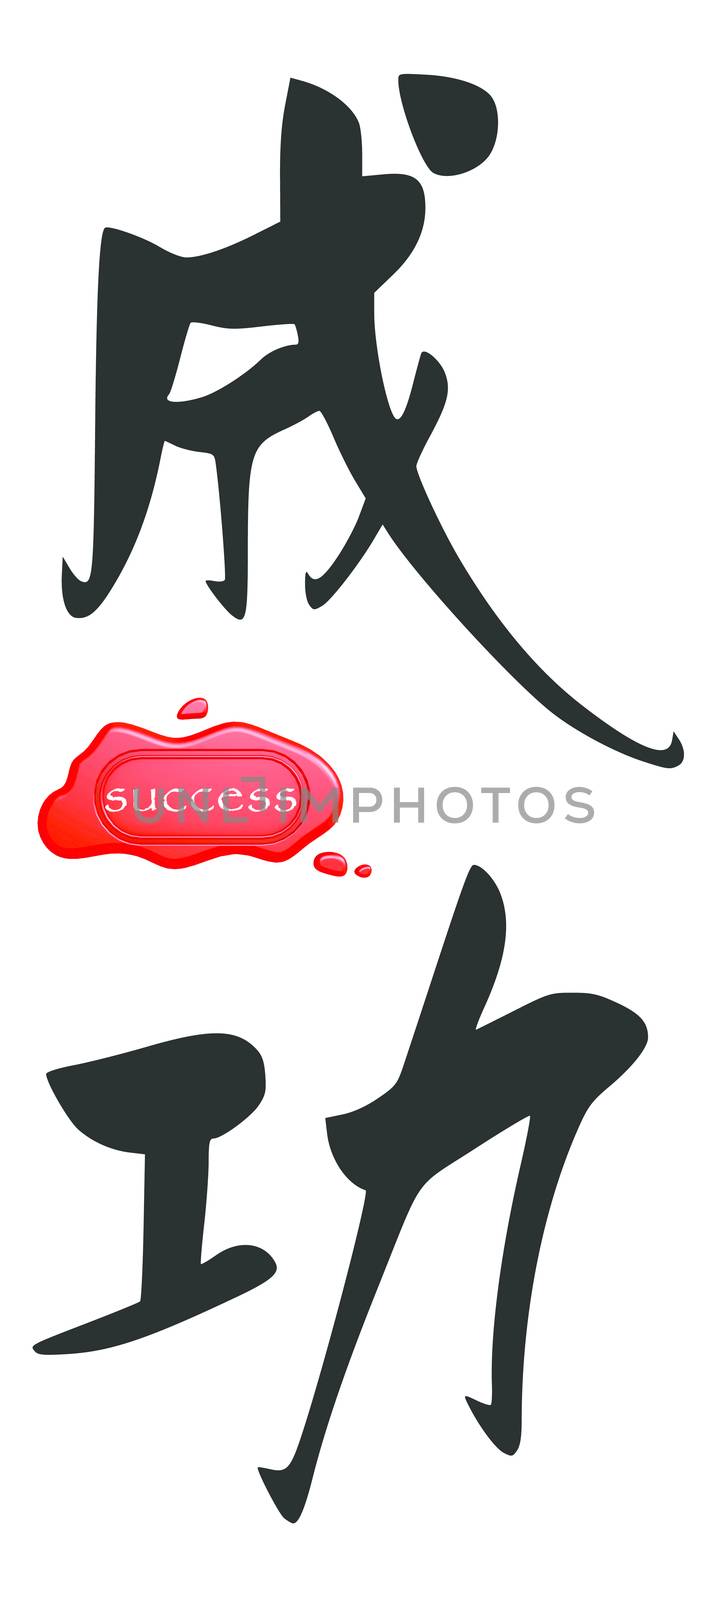 Success in Chinese